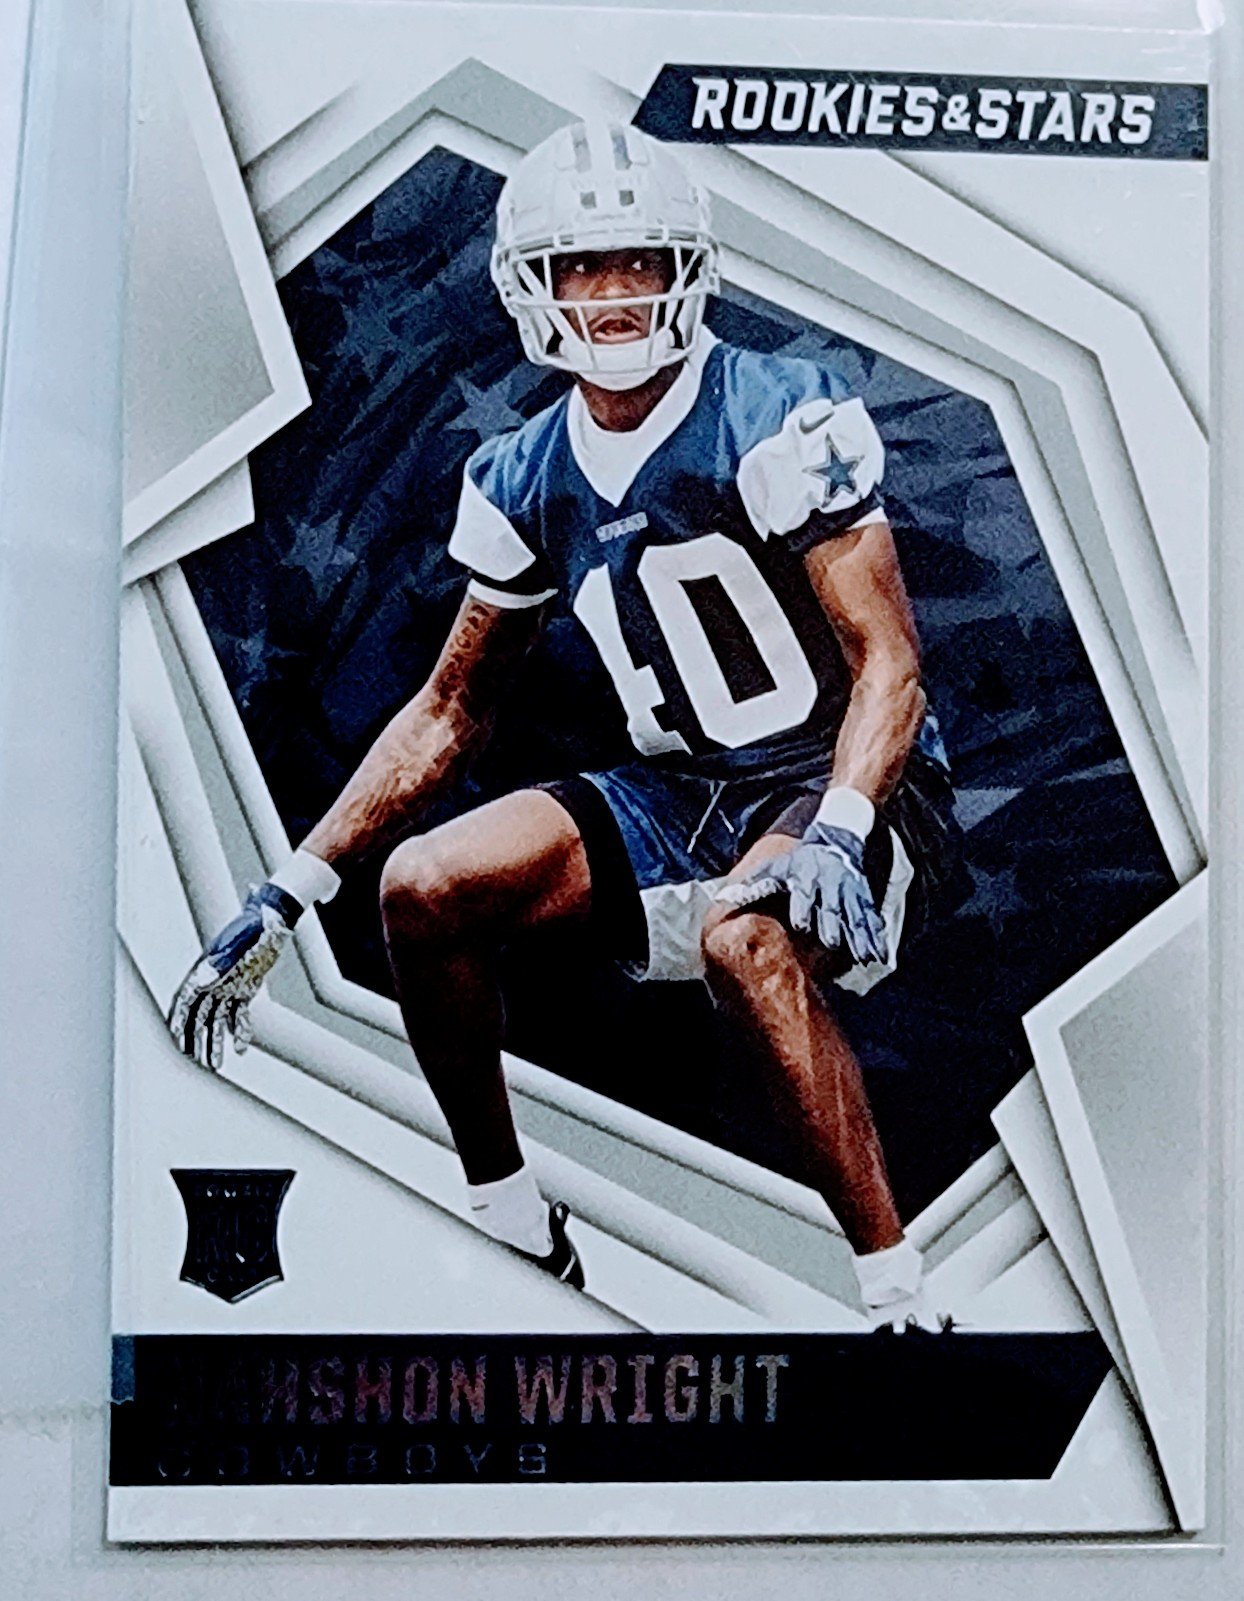 2021 Panini Rookies and Stars Nahson Wright Football Rookie Card AVM1 simple Xclusive Collectibles   